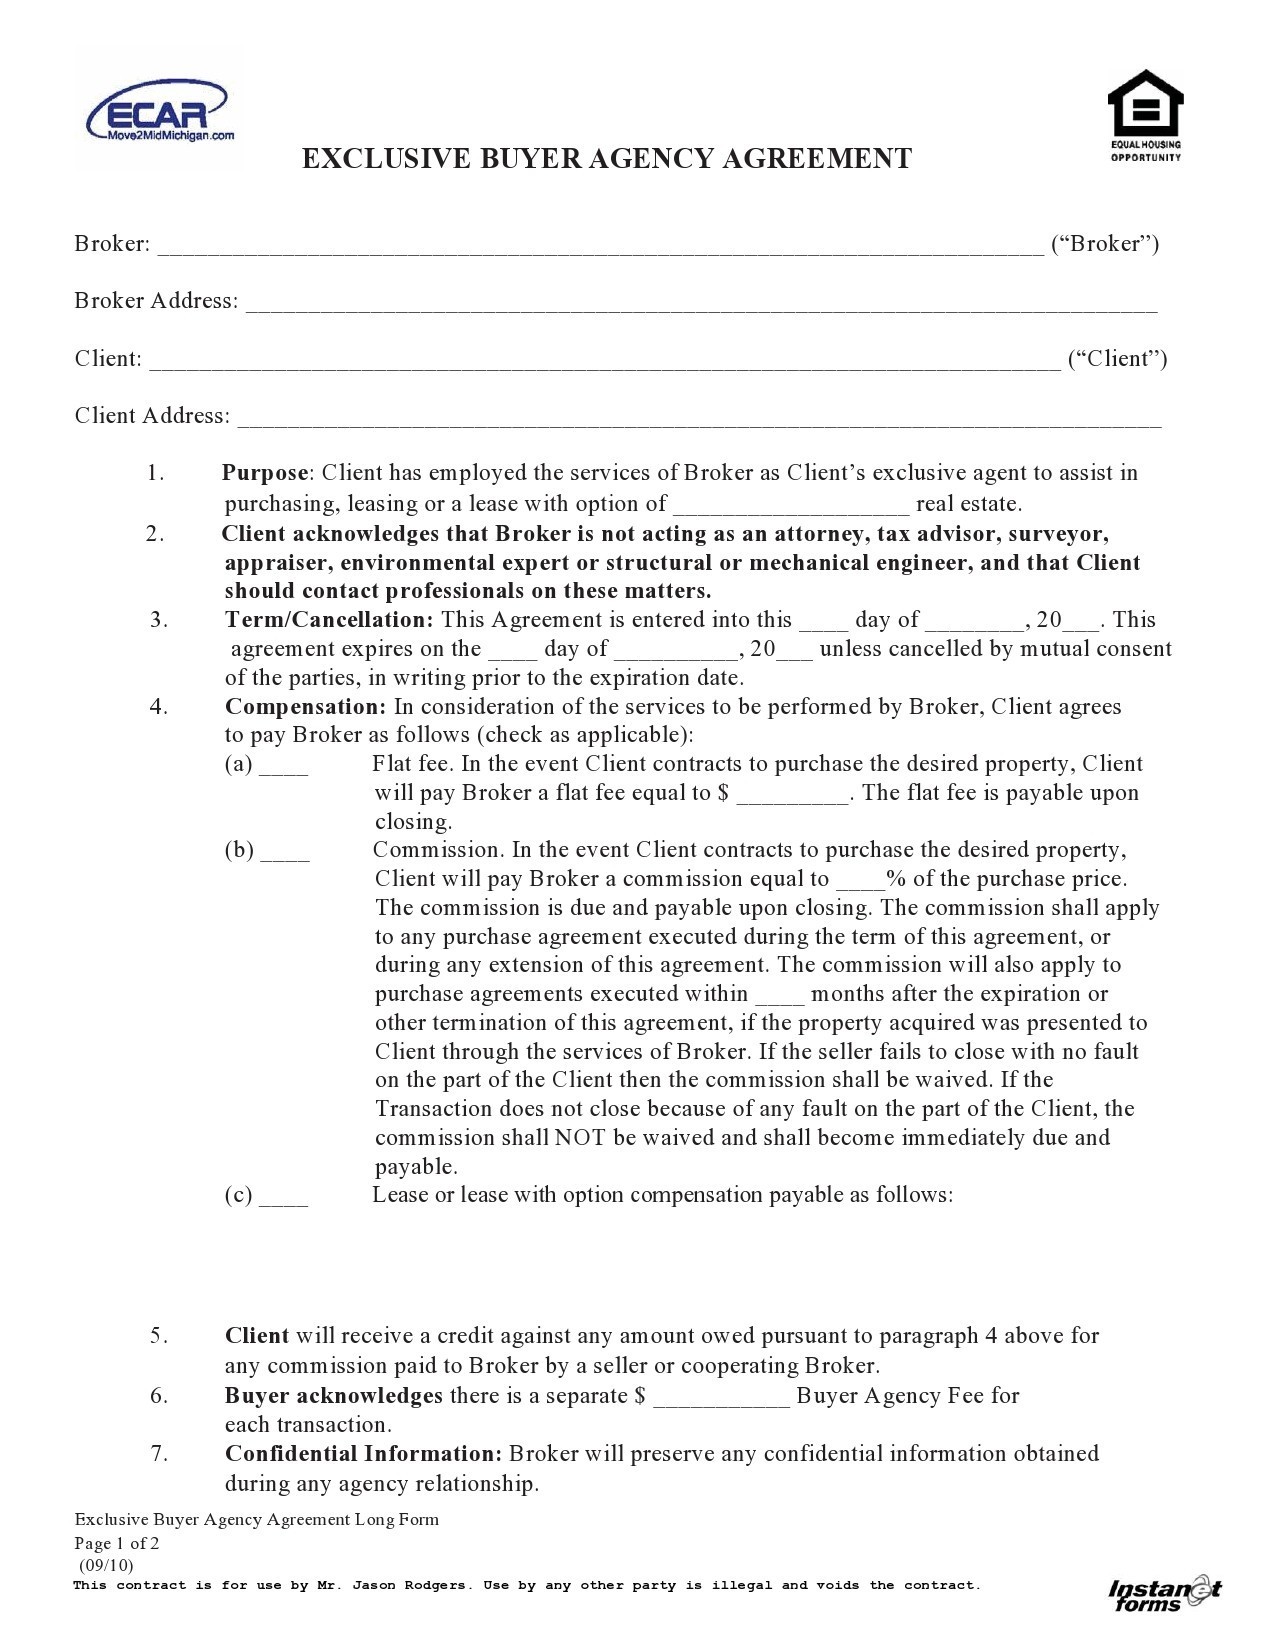 Free buyer agency agreement 28